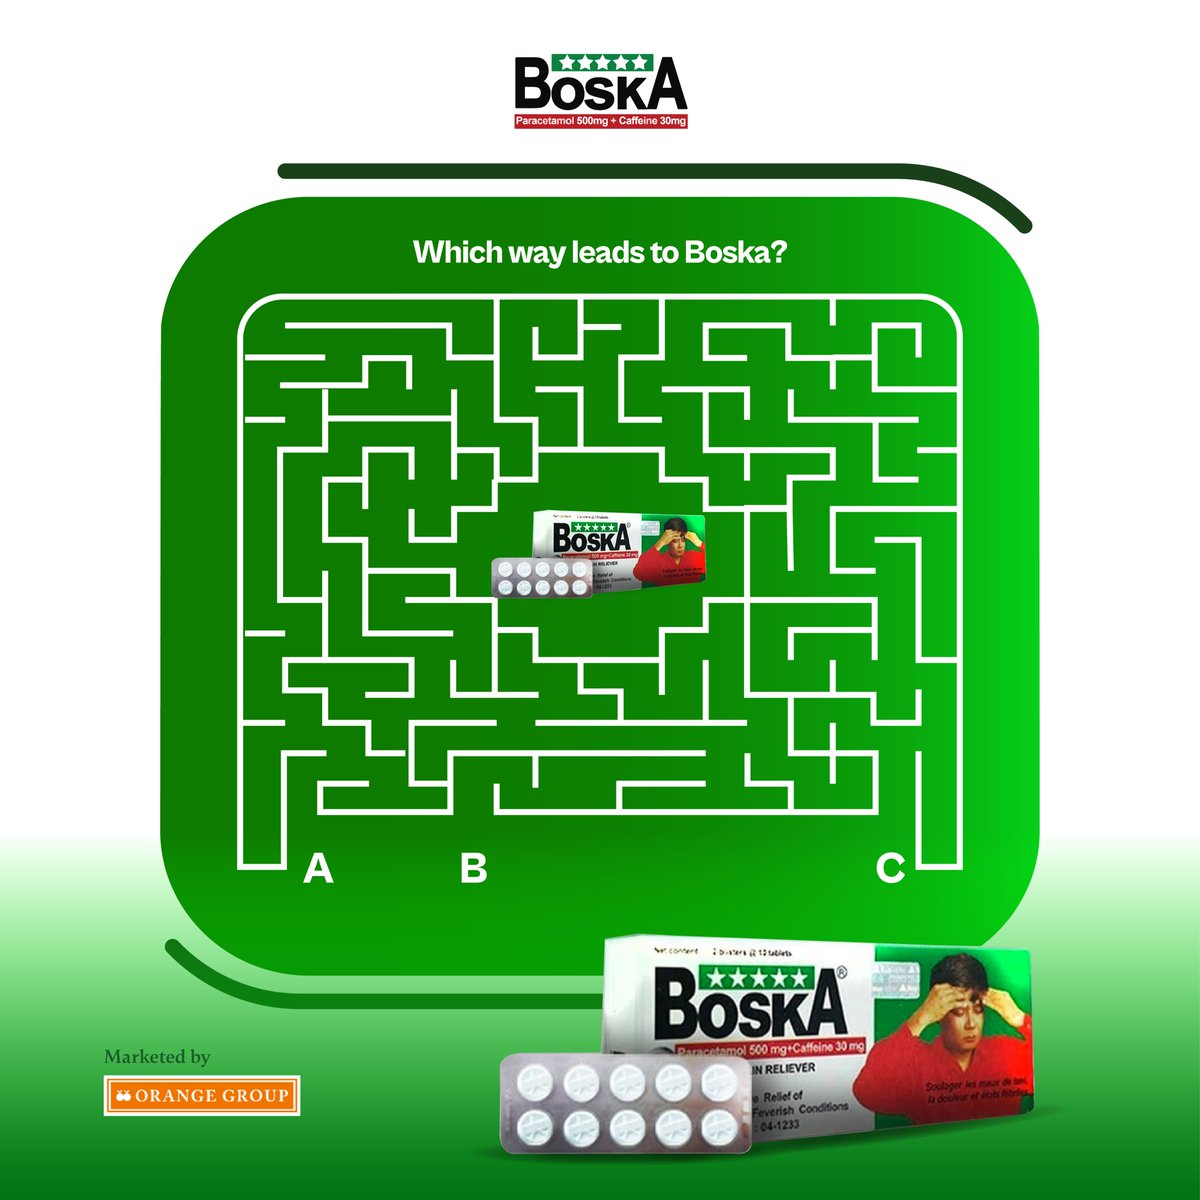 Join us for a fun-filled weekend of Boska games and stand a chance to win amazing prizes. Play, enjoy, and be pain and headache-free with Boska. Answer correctly and you could be our next winner!

#painrelief #headache #Boska #bepainfree #BoskaRelief #TGIF